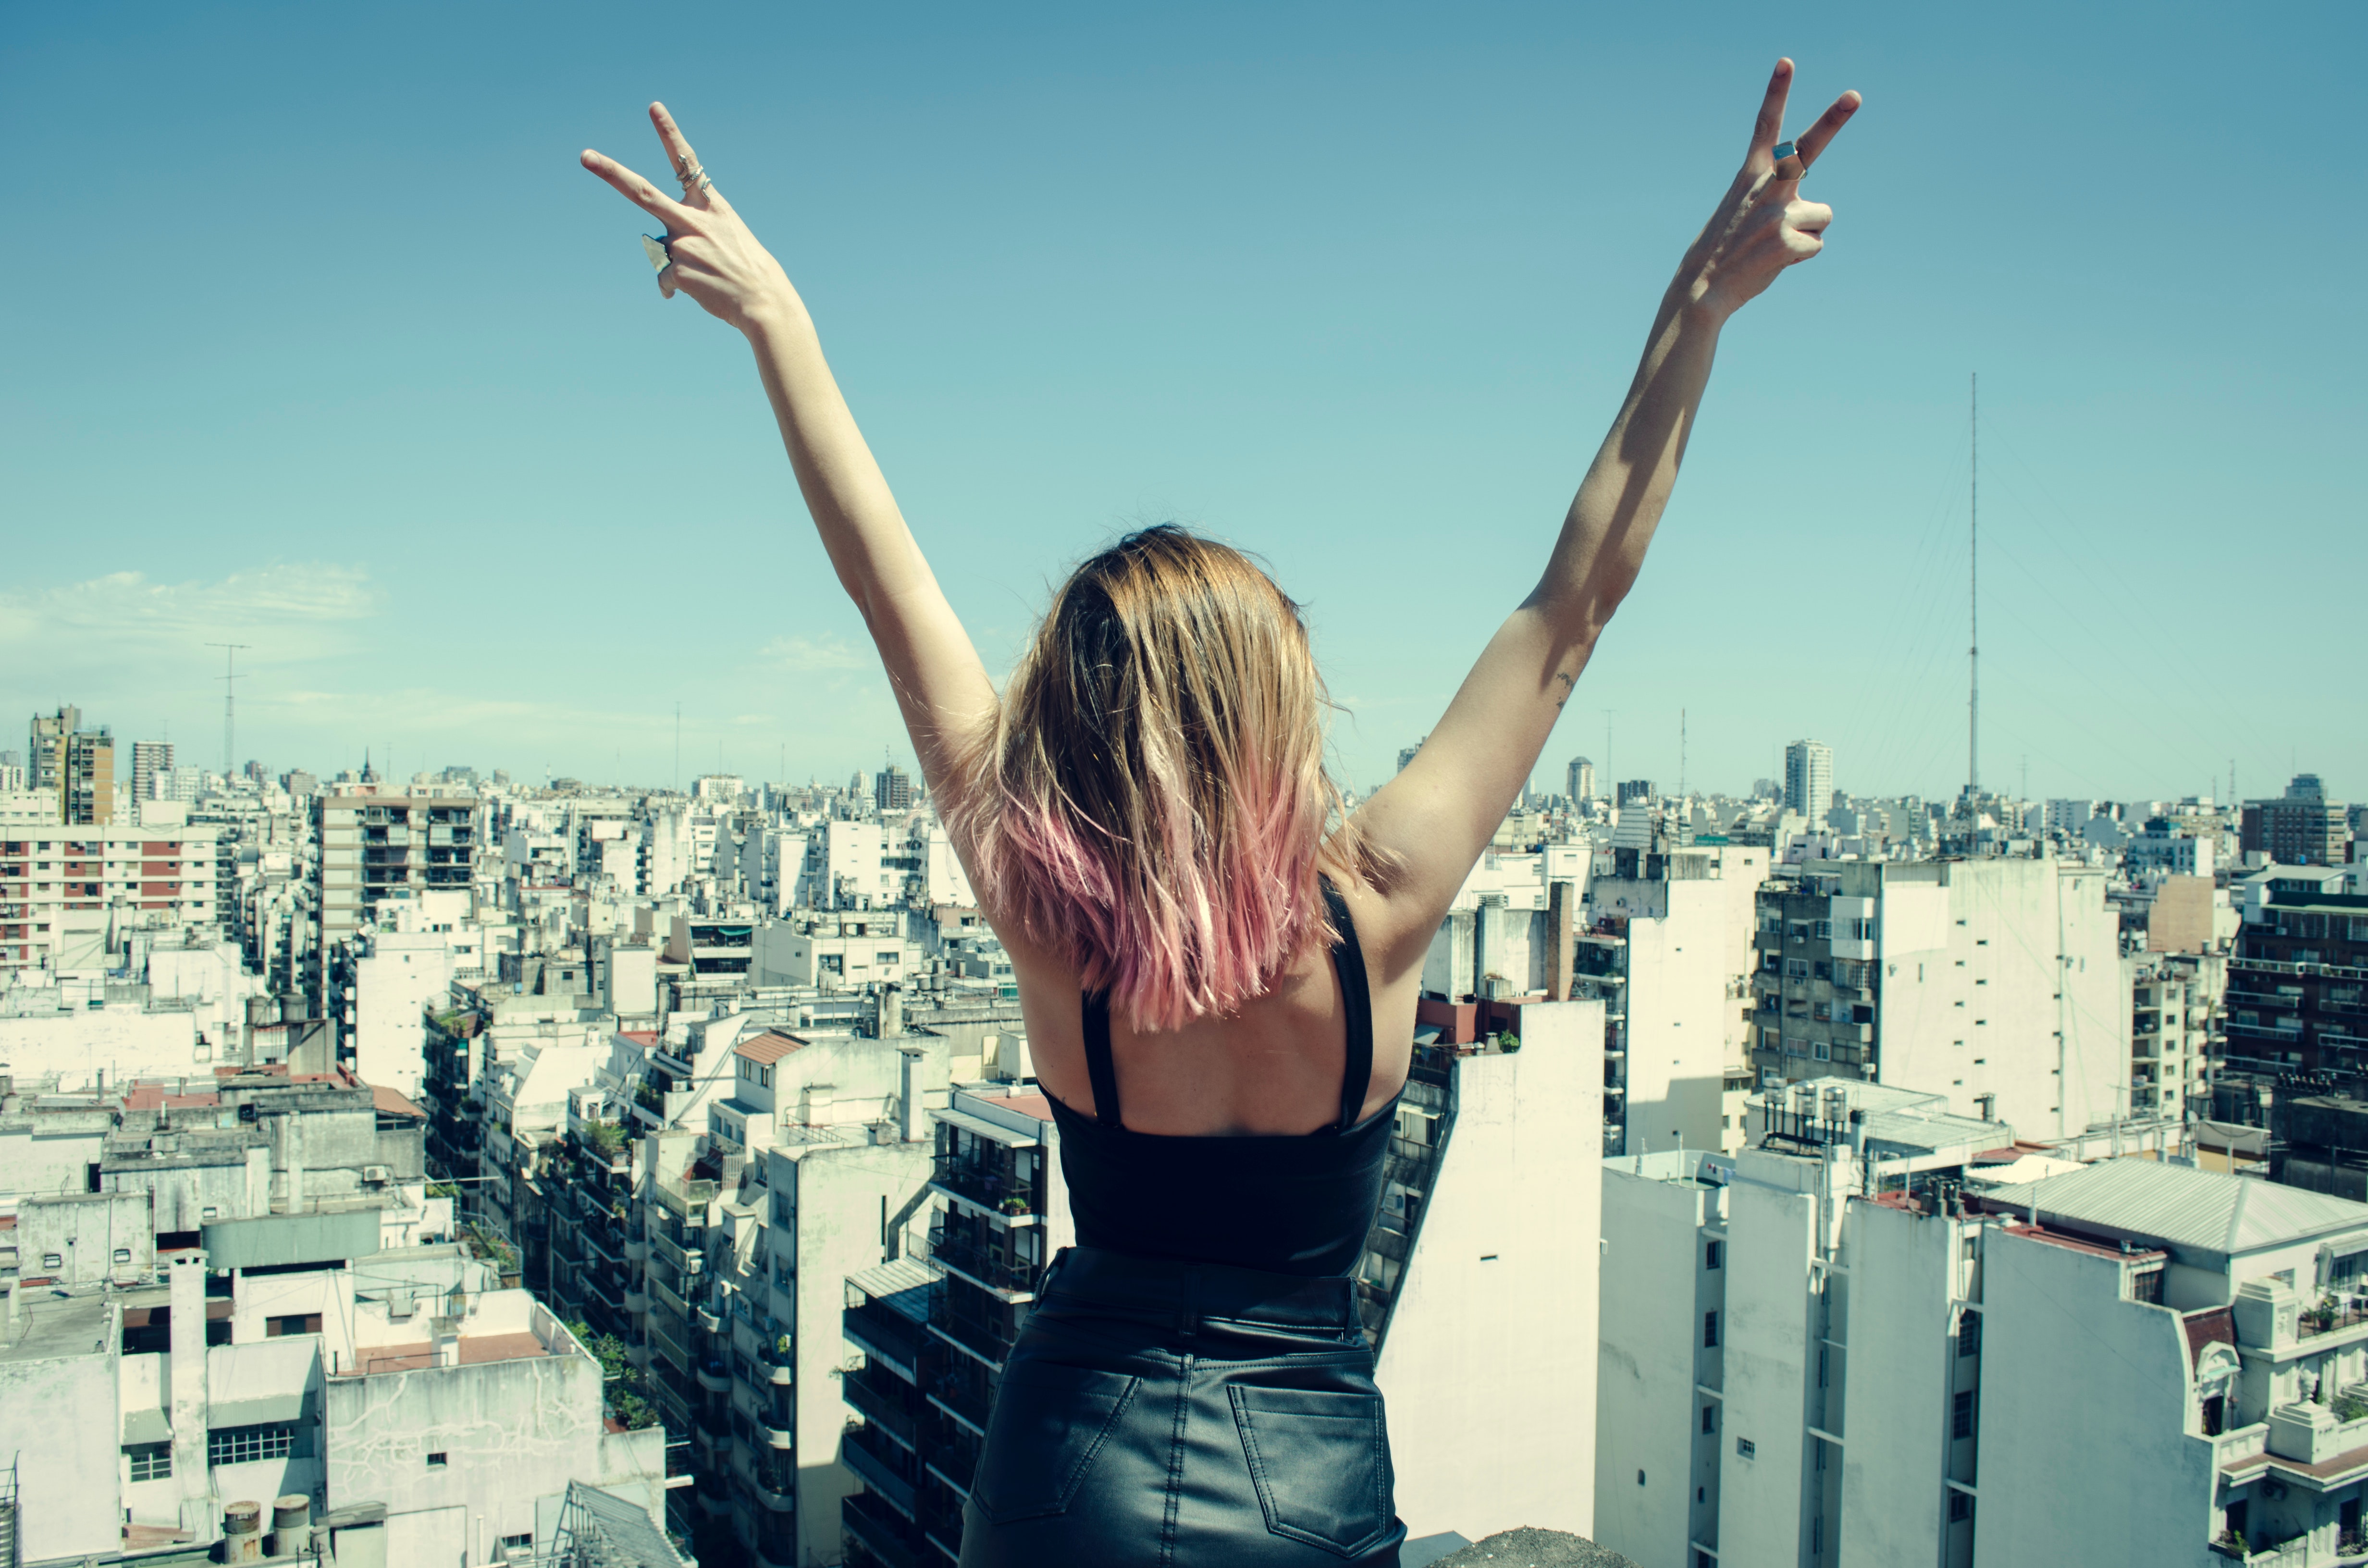 A confident woman wearing a leather dress holds her hands in a peace sign at the top of a building.